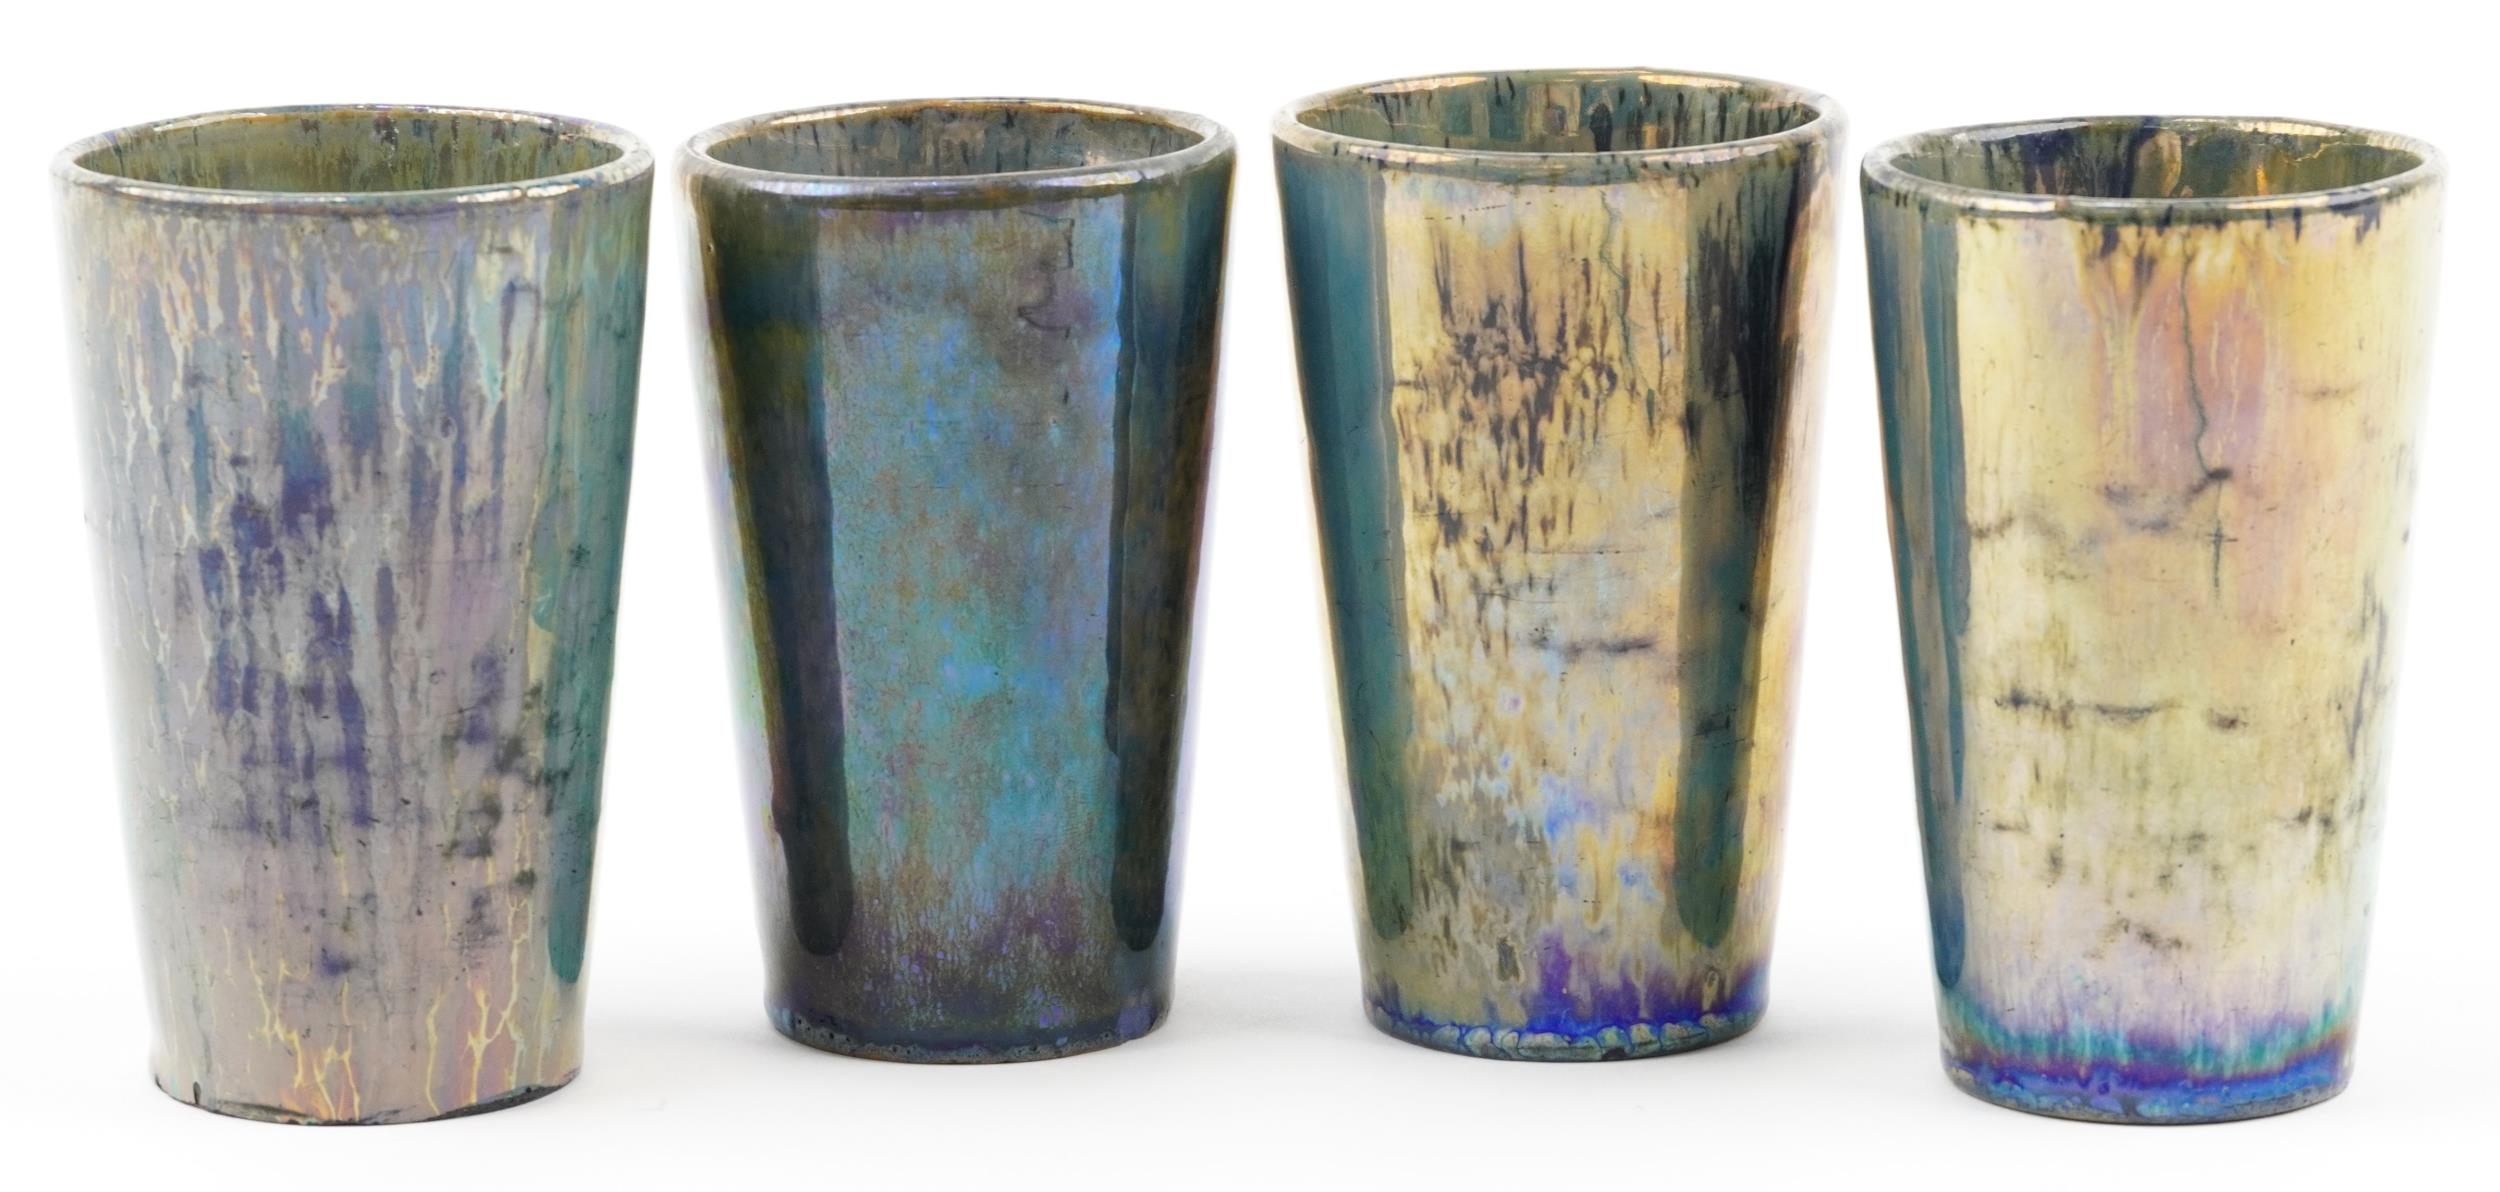 Alphonse Cytere-Rambervillers, set of four French pottery beakers having iridescent green and blue - Image 2 of 4